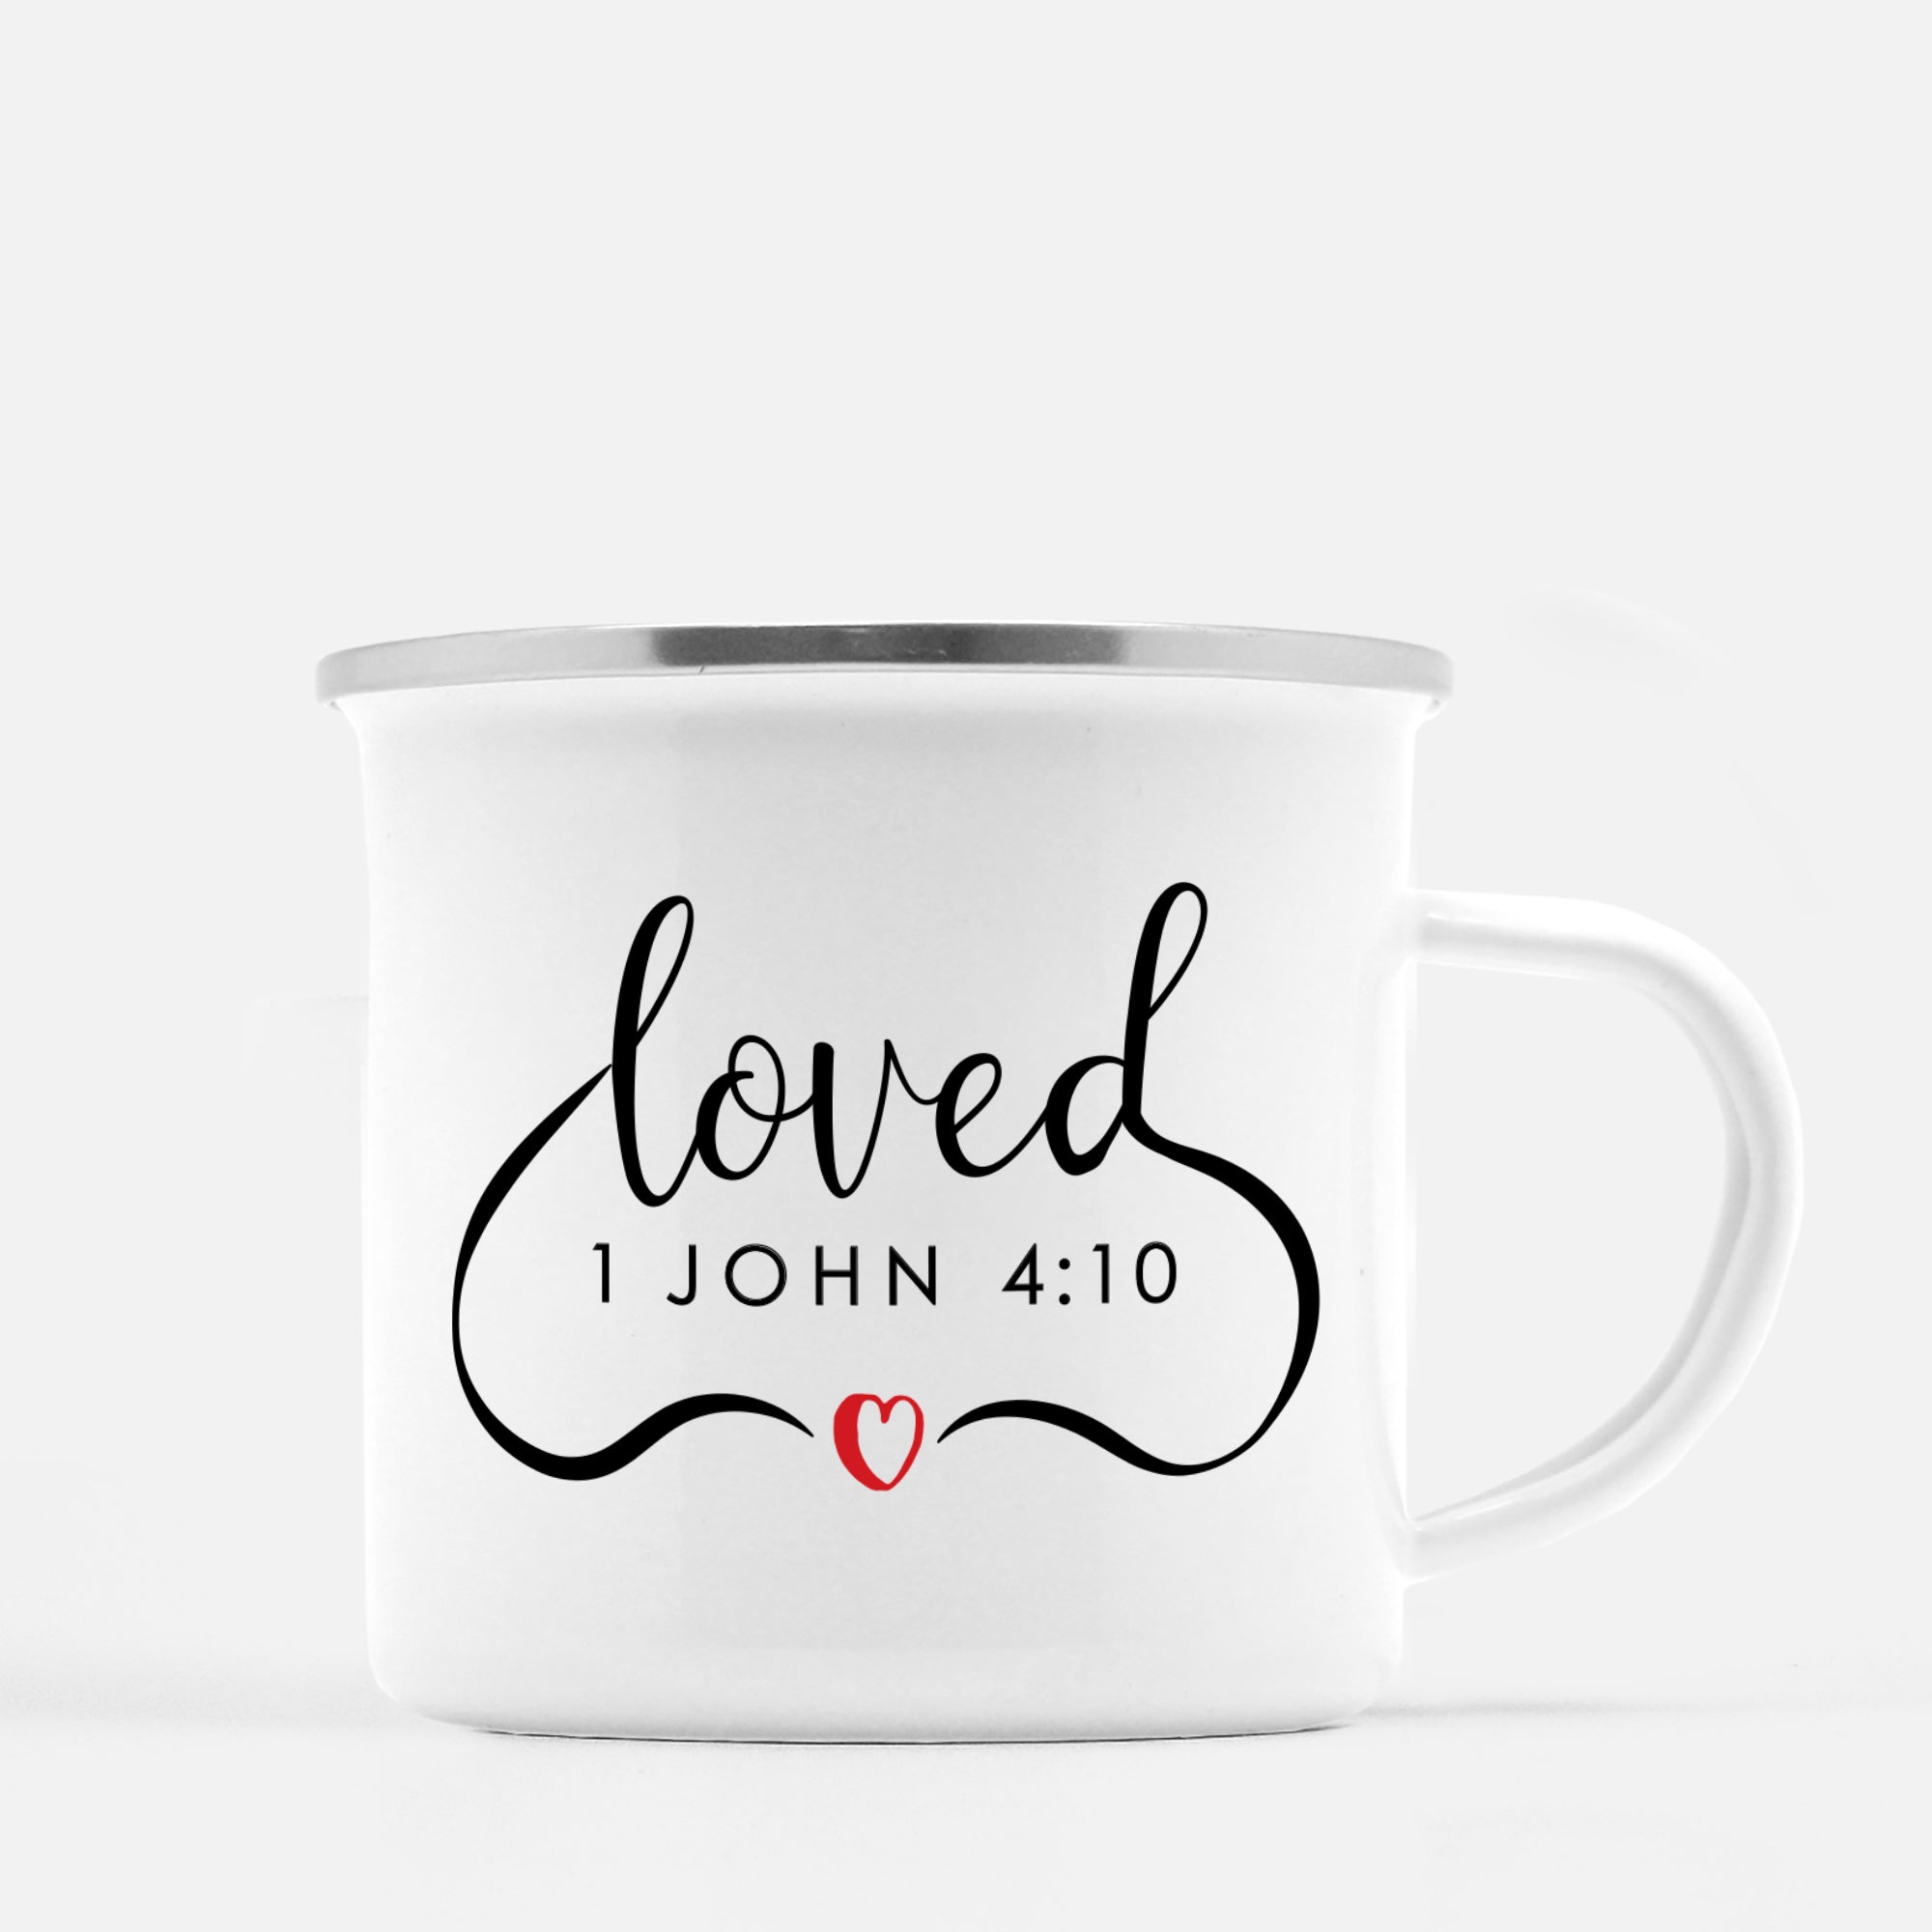 White enamel 12 oz metal camp mug with silver lip | 1 John 4:10 "Loved" in flowing script | Valentine's Day gift